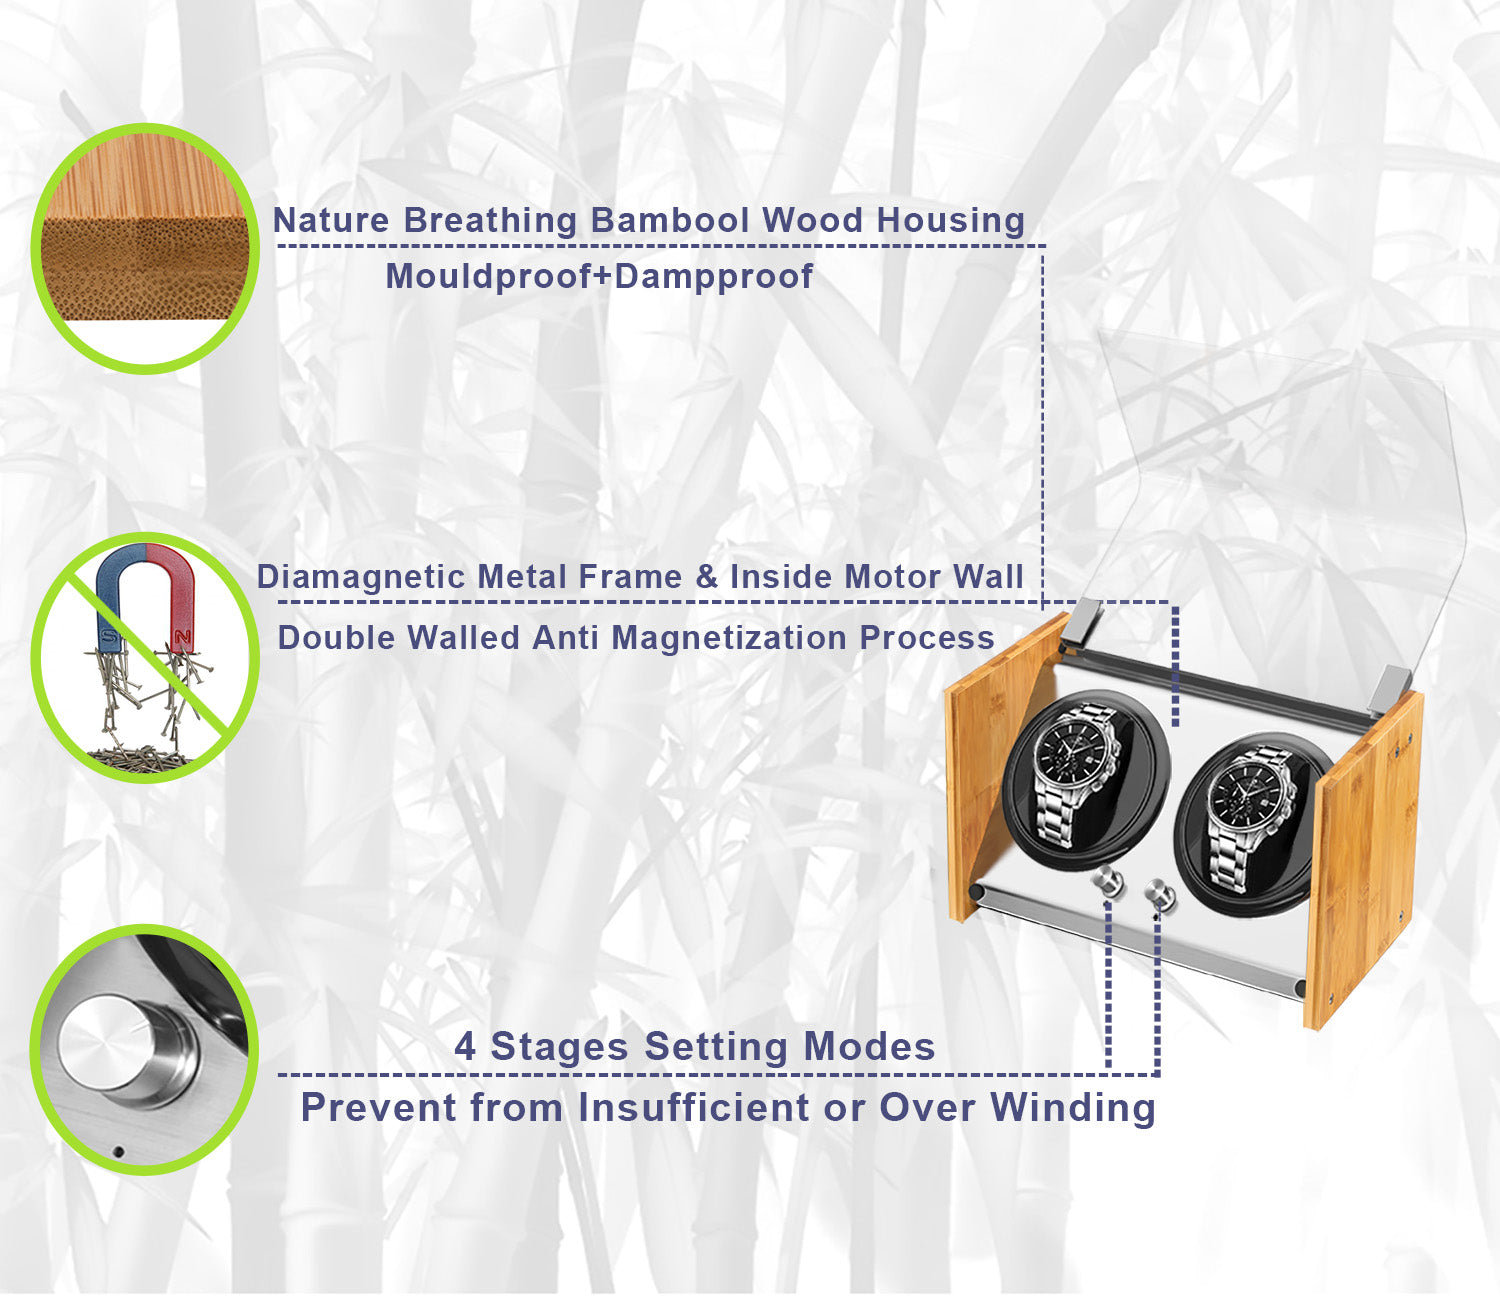 Watch Winder Double ｜ for Big Automatic Watches Bamboo Handcraft Super Quiet by Watch Winder Smith®